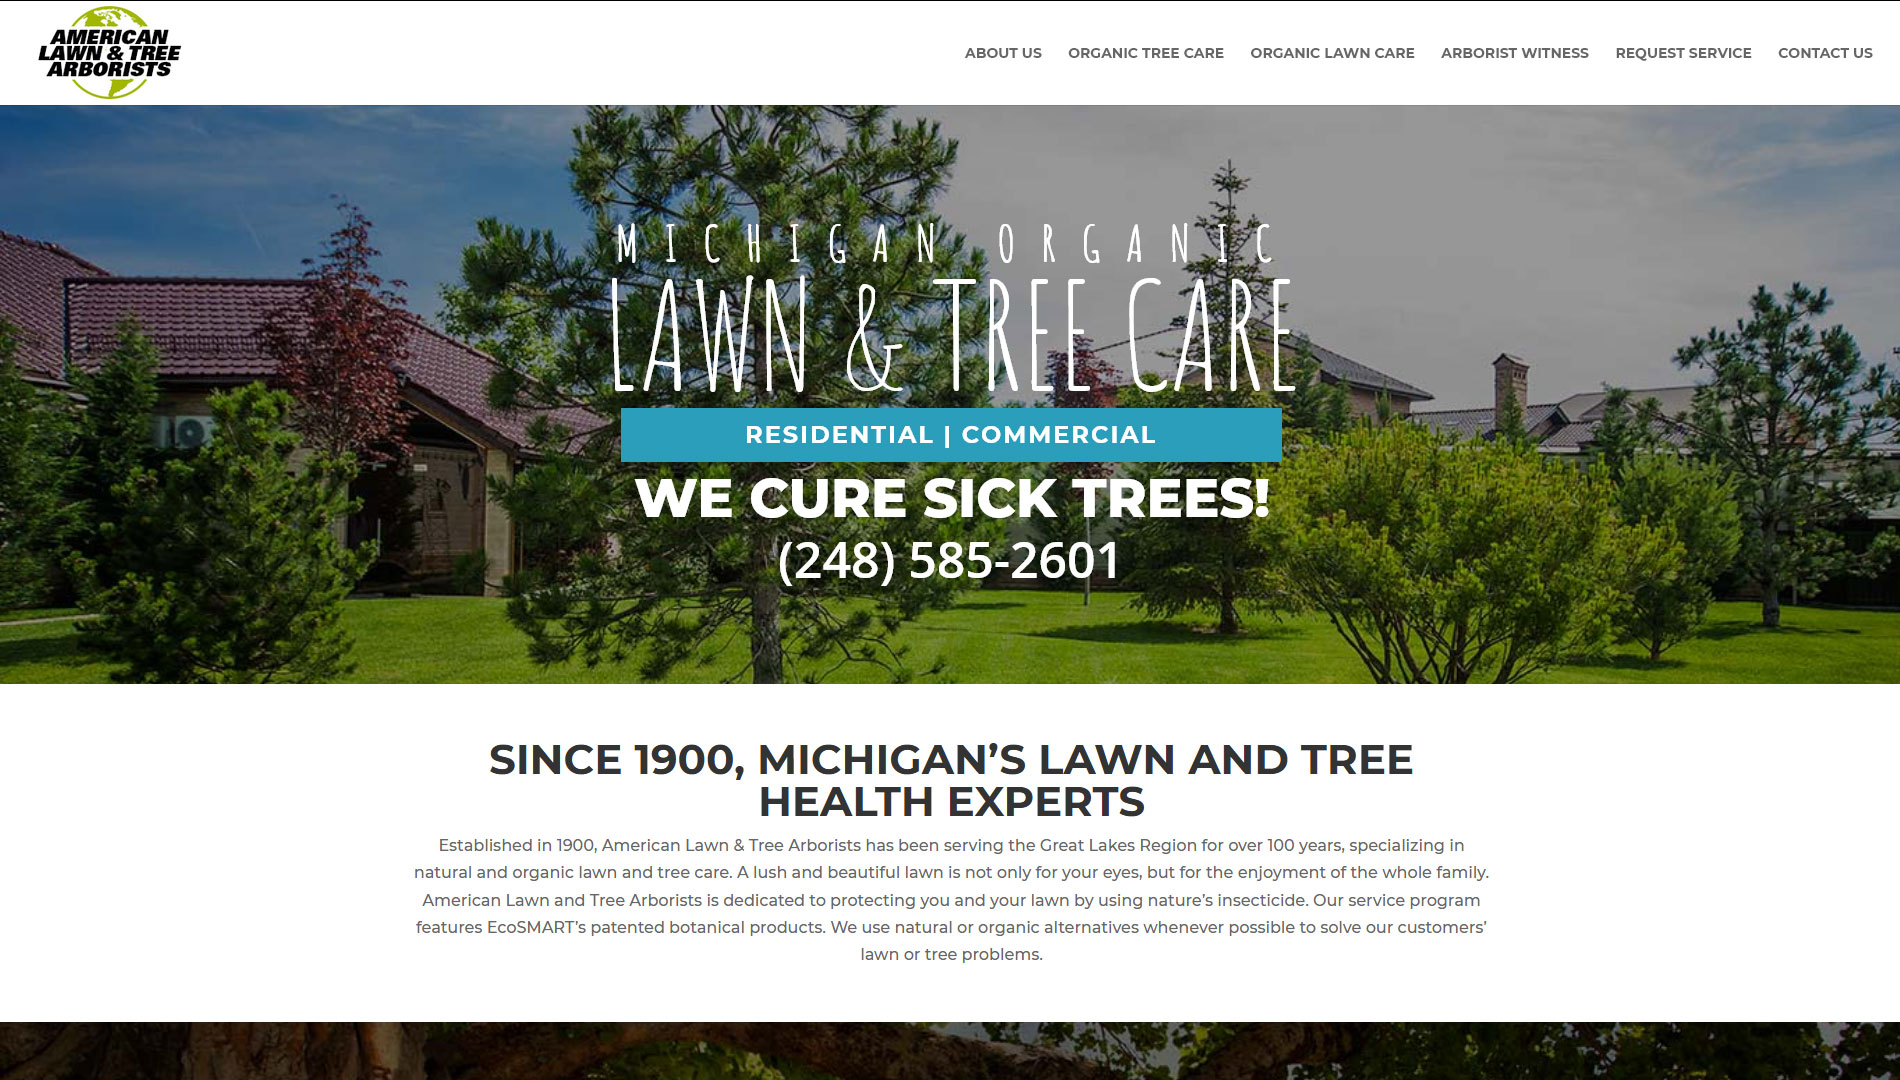 American Lawn and Tree Arborists